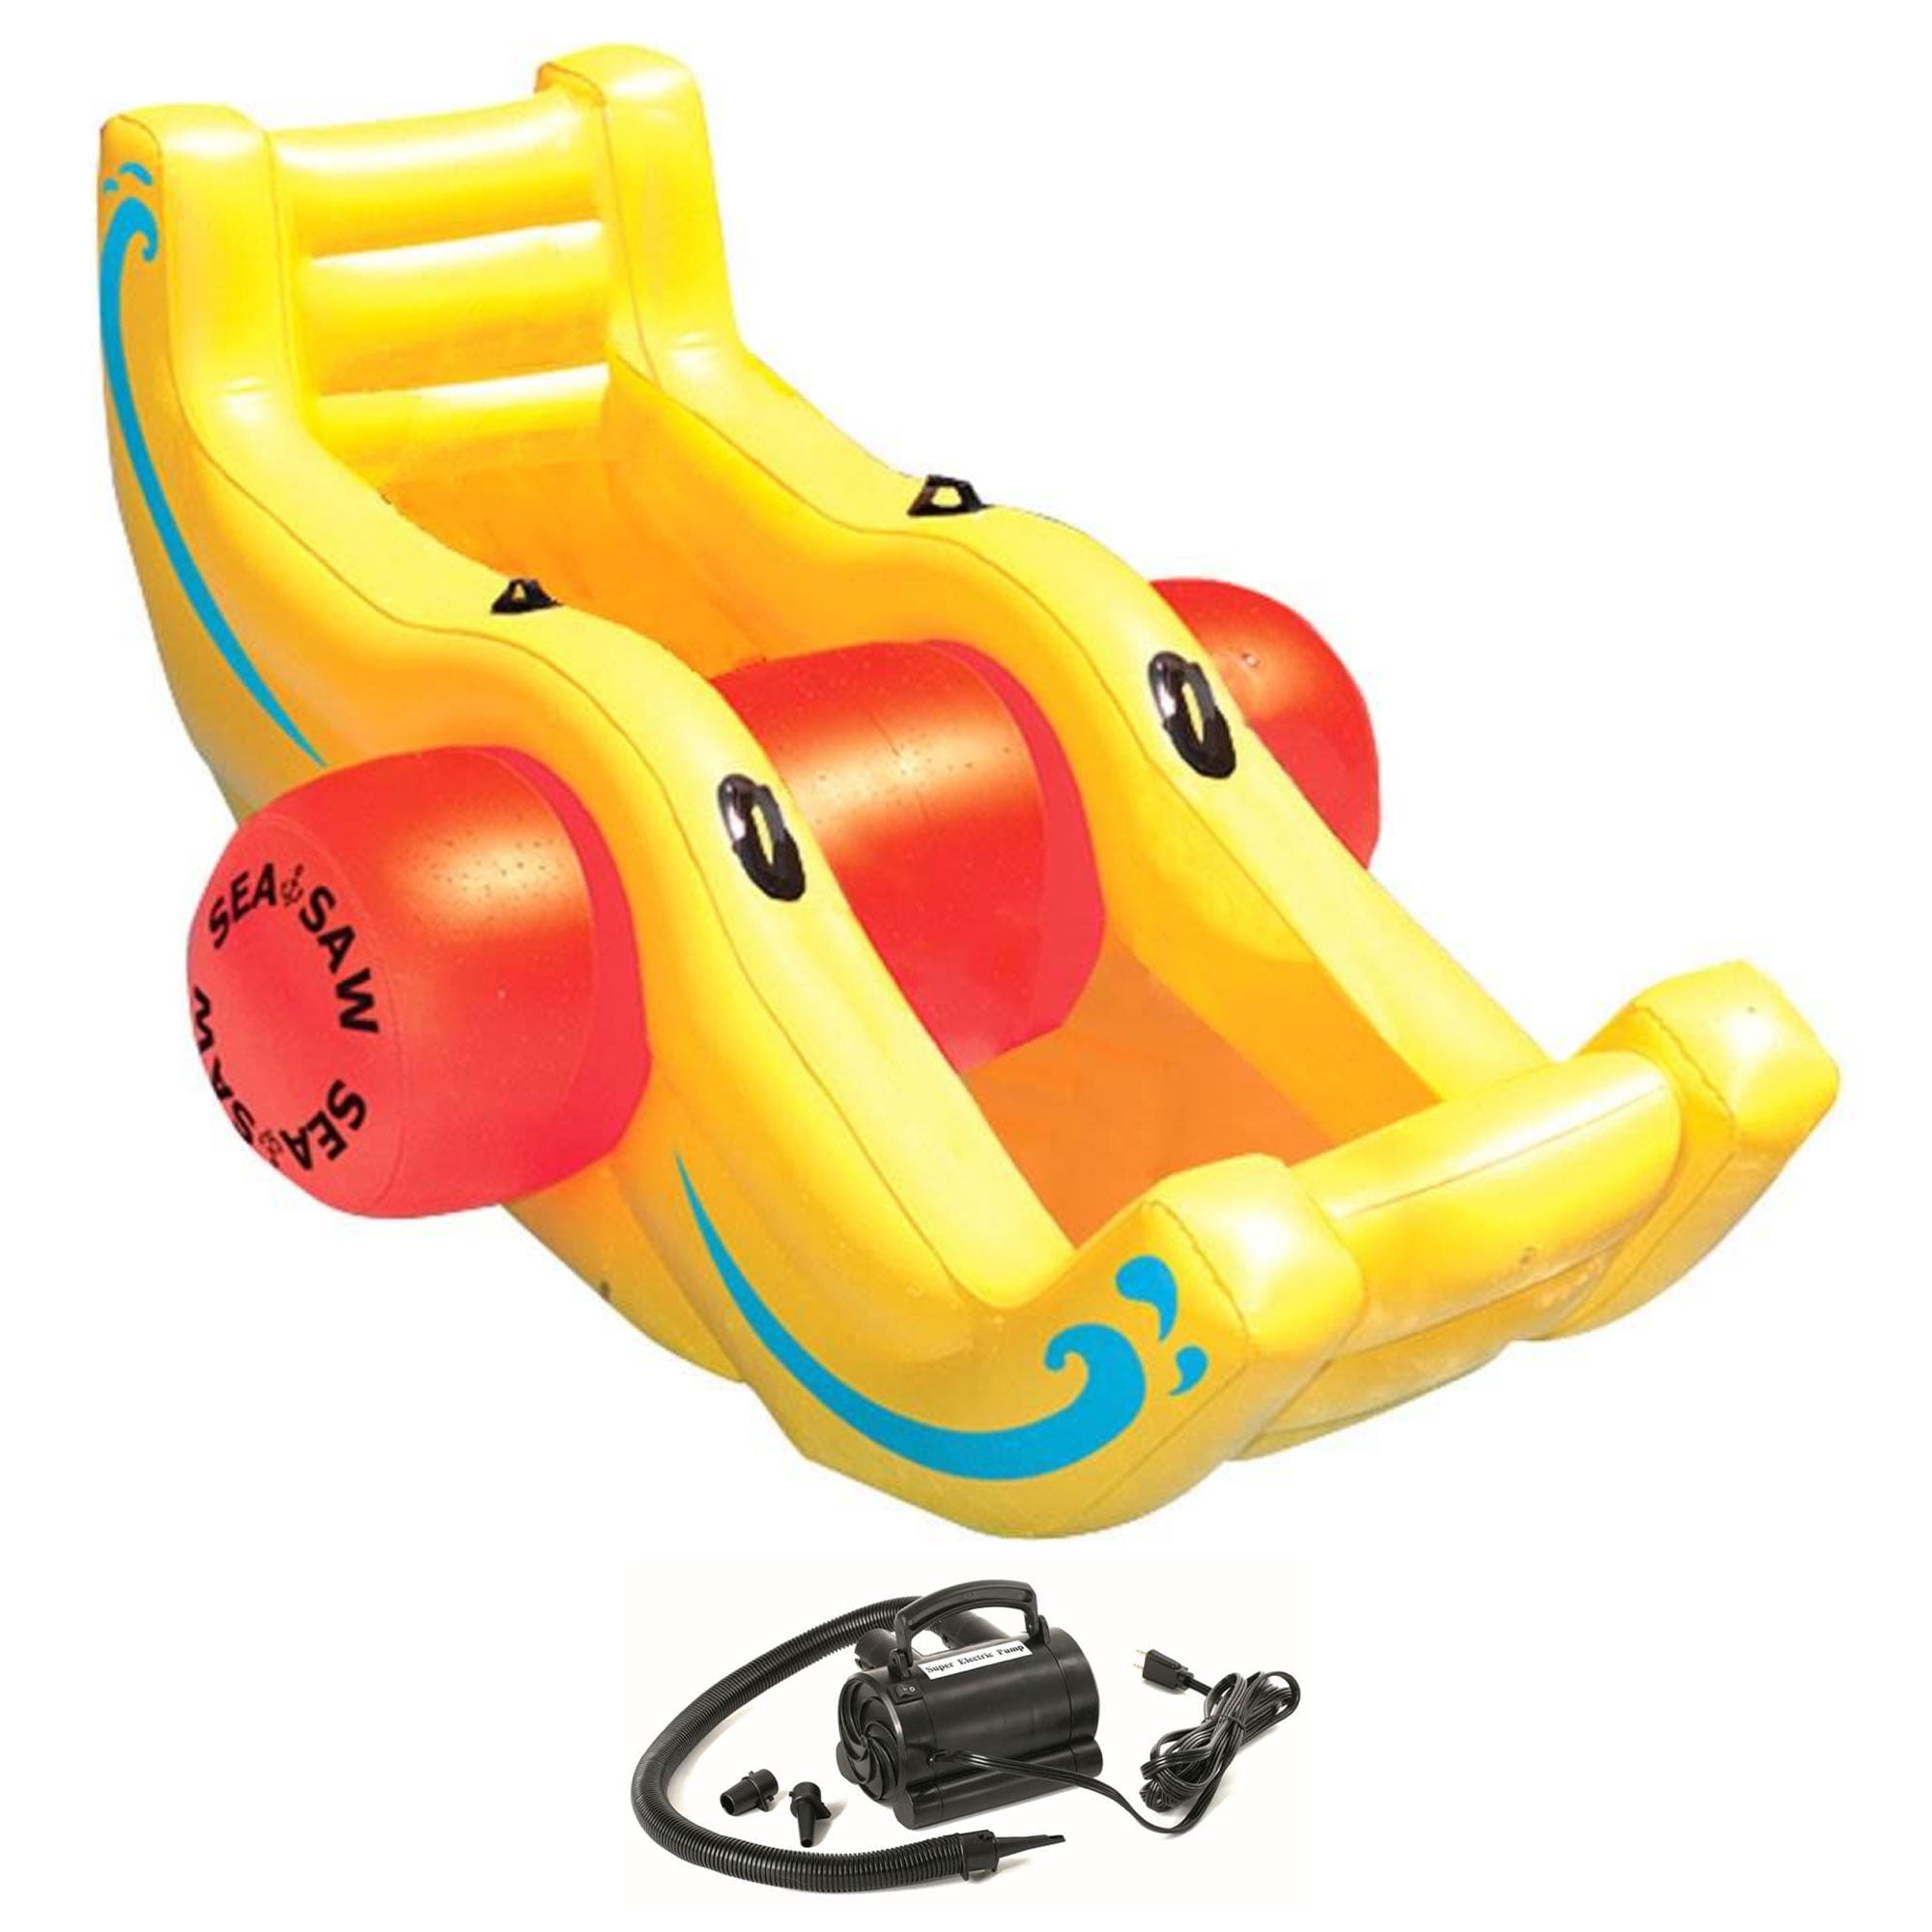 Swimline Battery Operated Inflator For Floats and Toys 